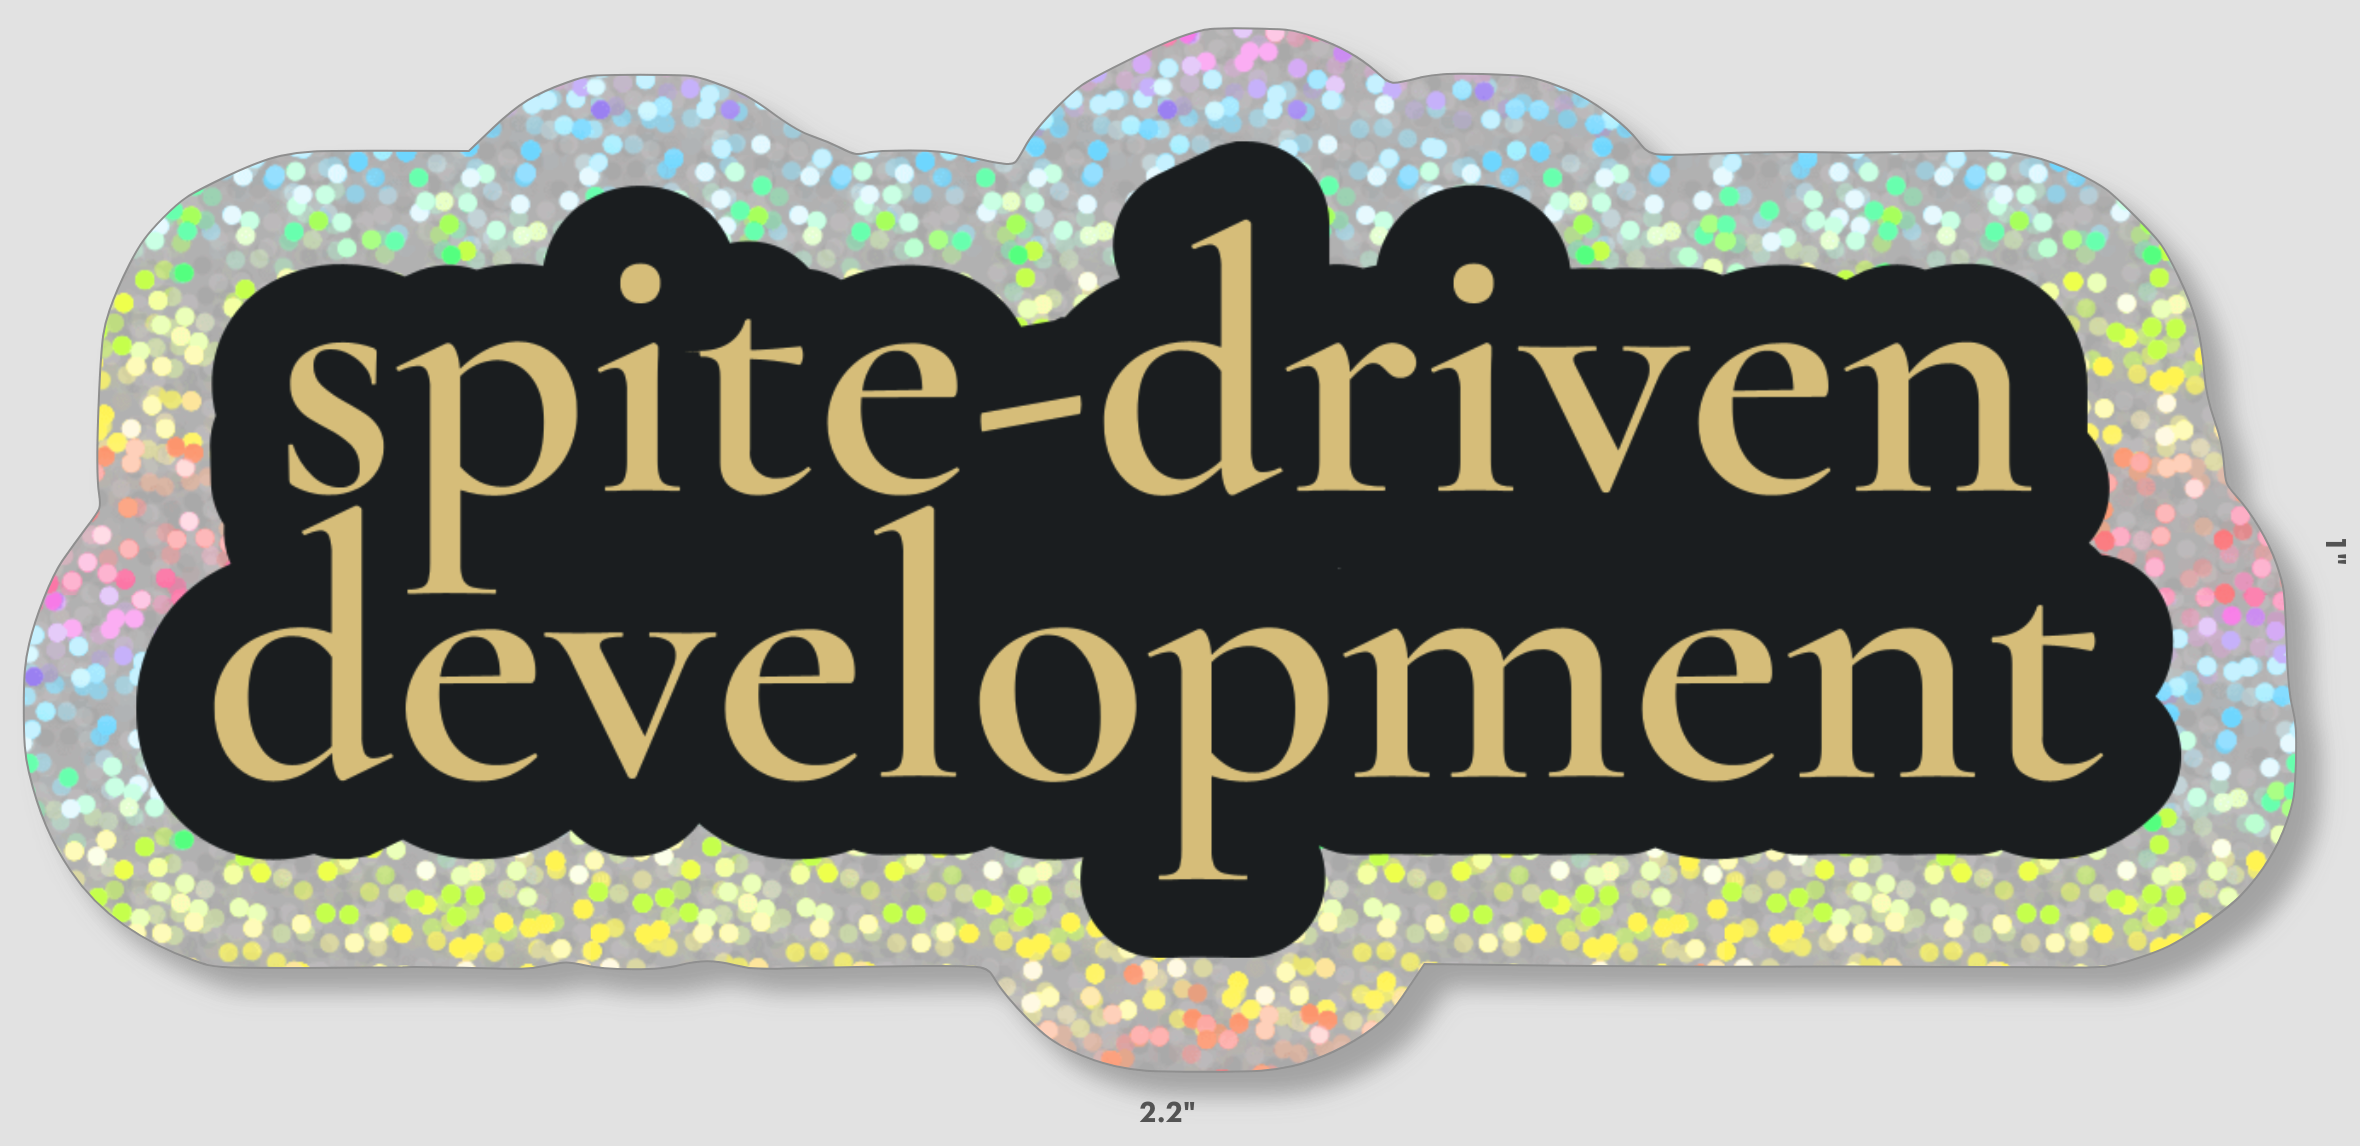 spite-driven development in gold serif font on black outline with larger sparkly outline. Sticker is 1 by 2.2 inches